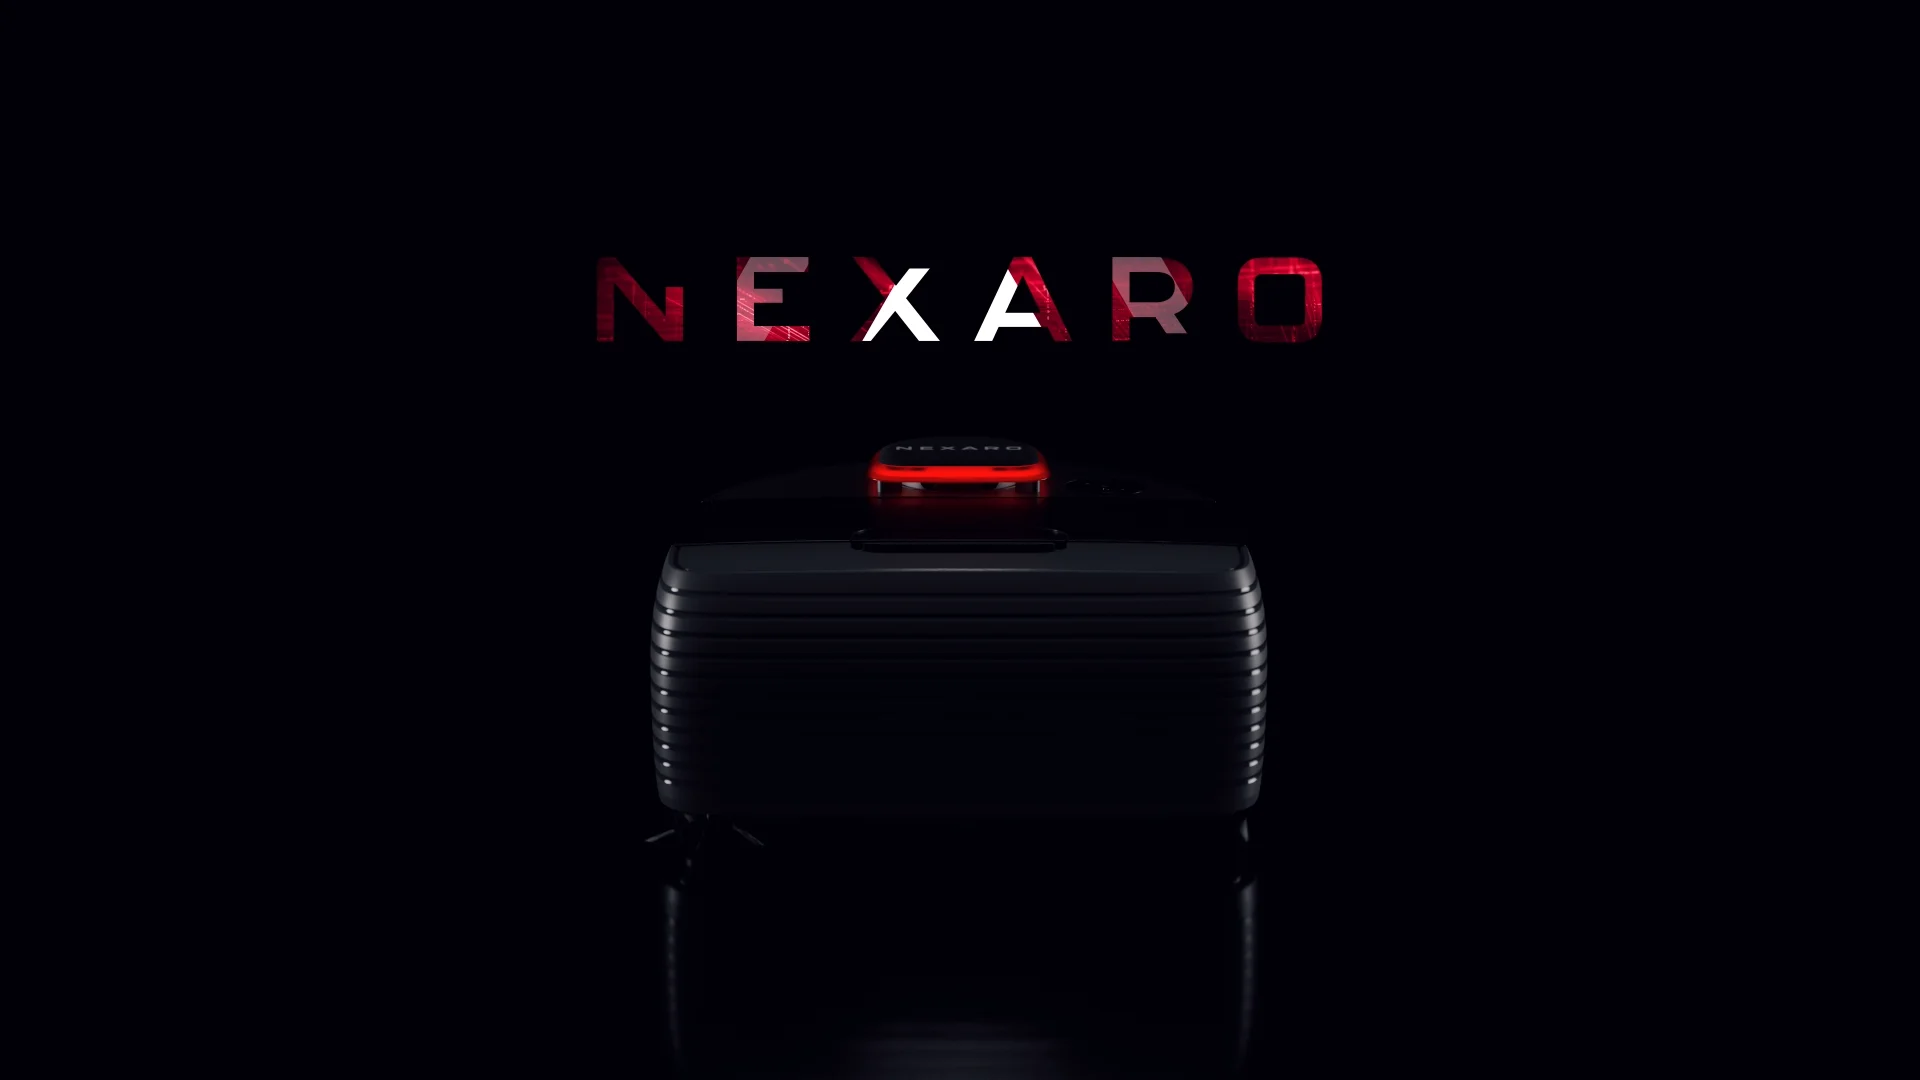 a black nexaro vacuum cleaner robot in an undefined black room and the written word NEXARO flying over it